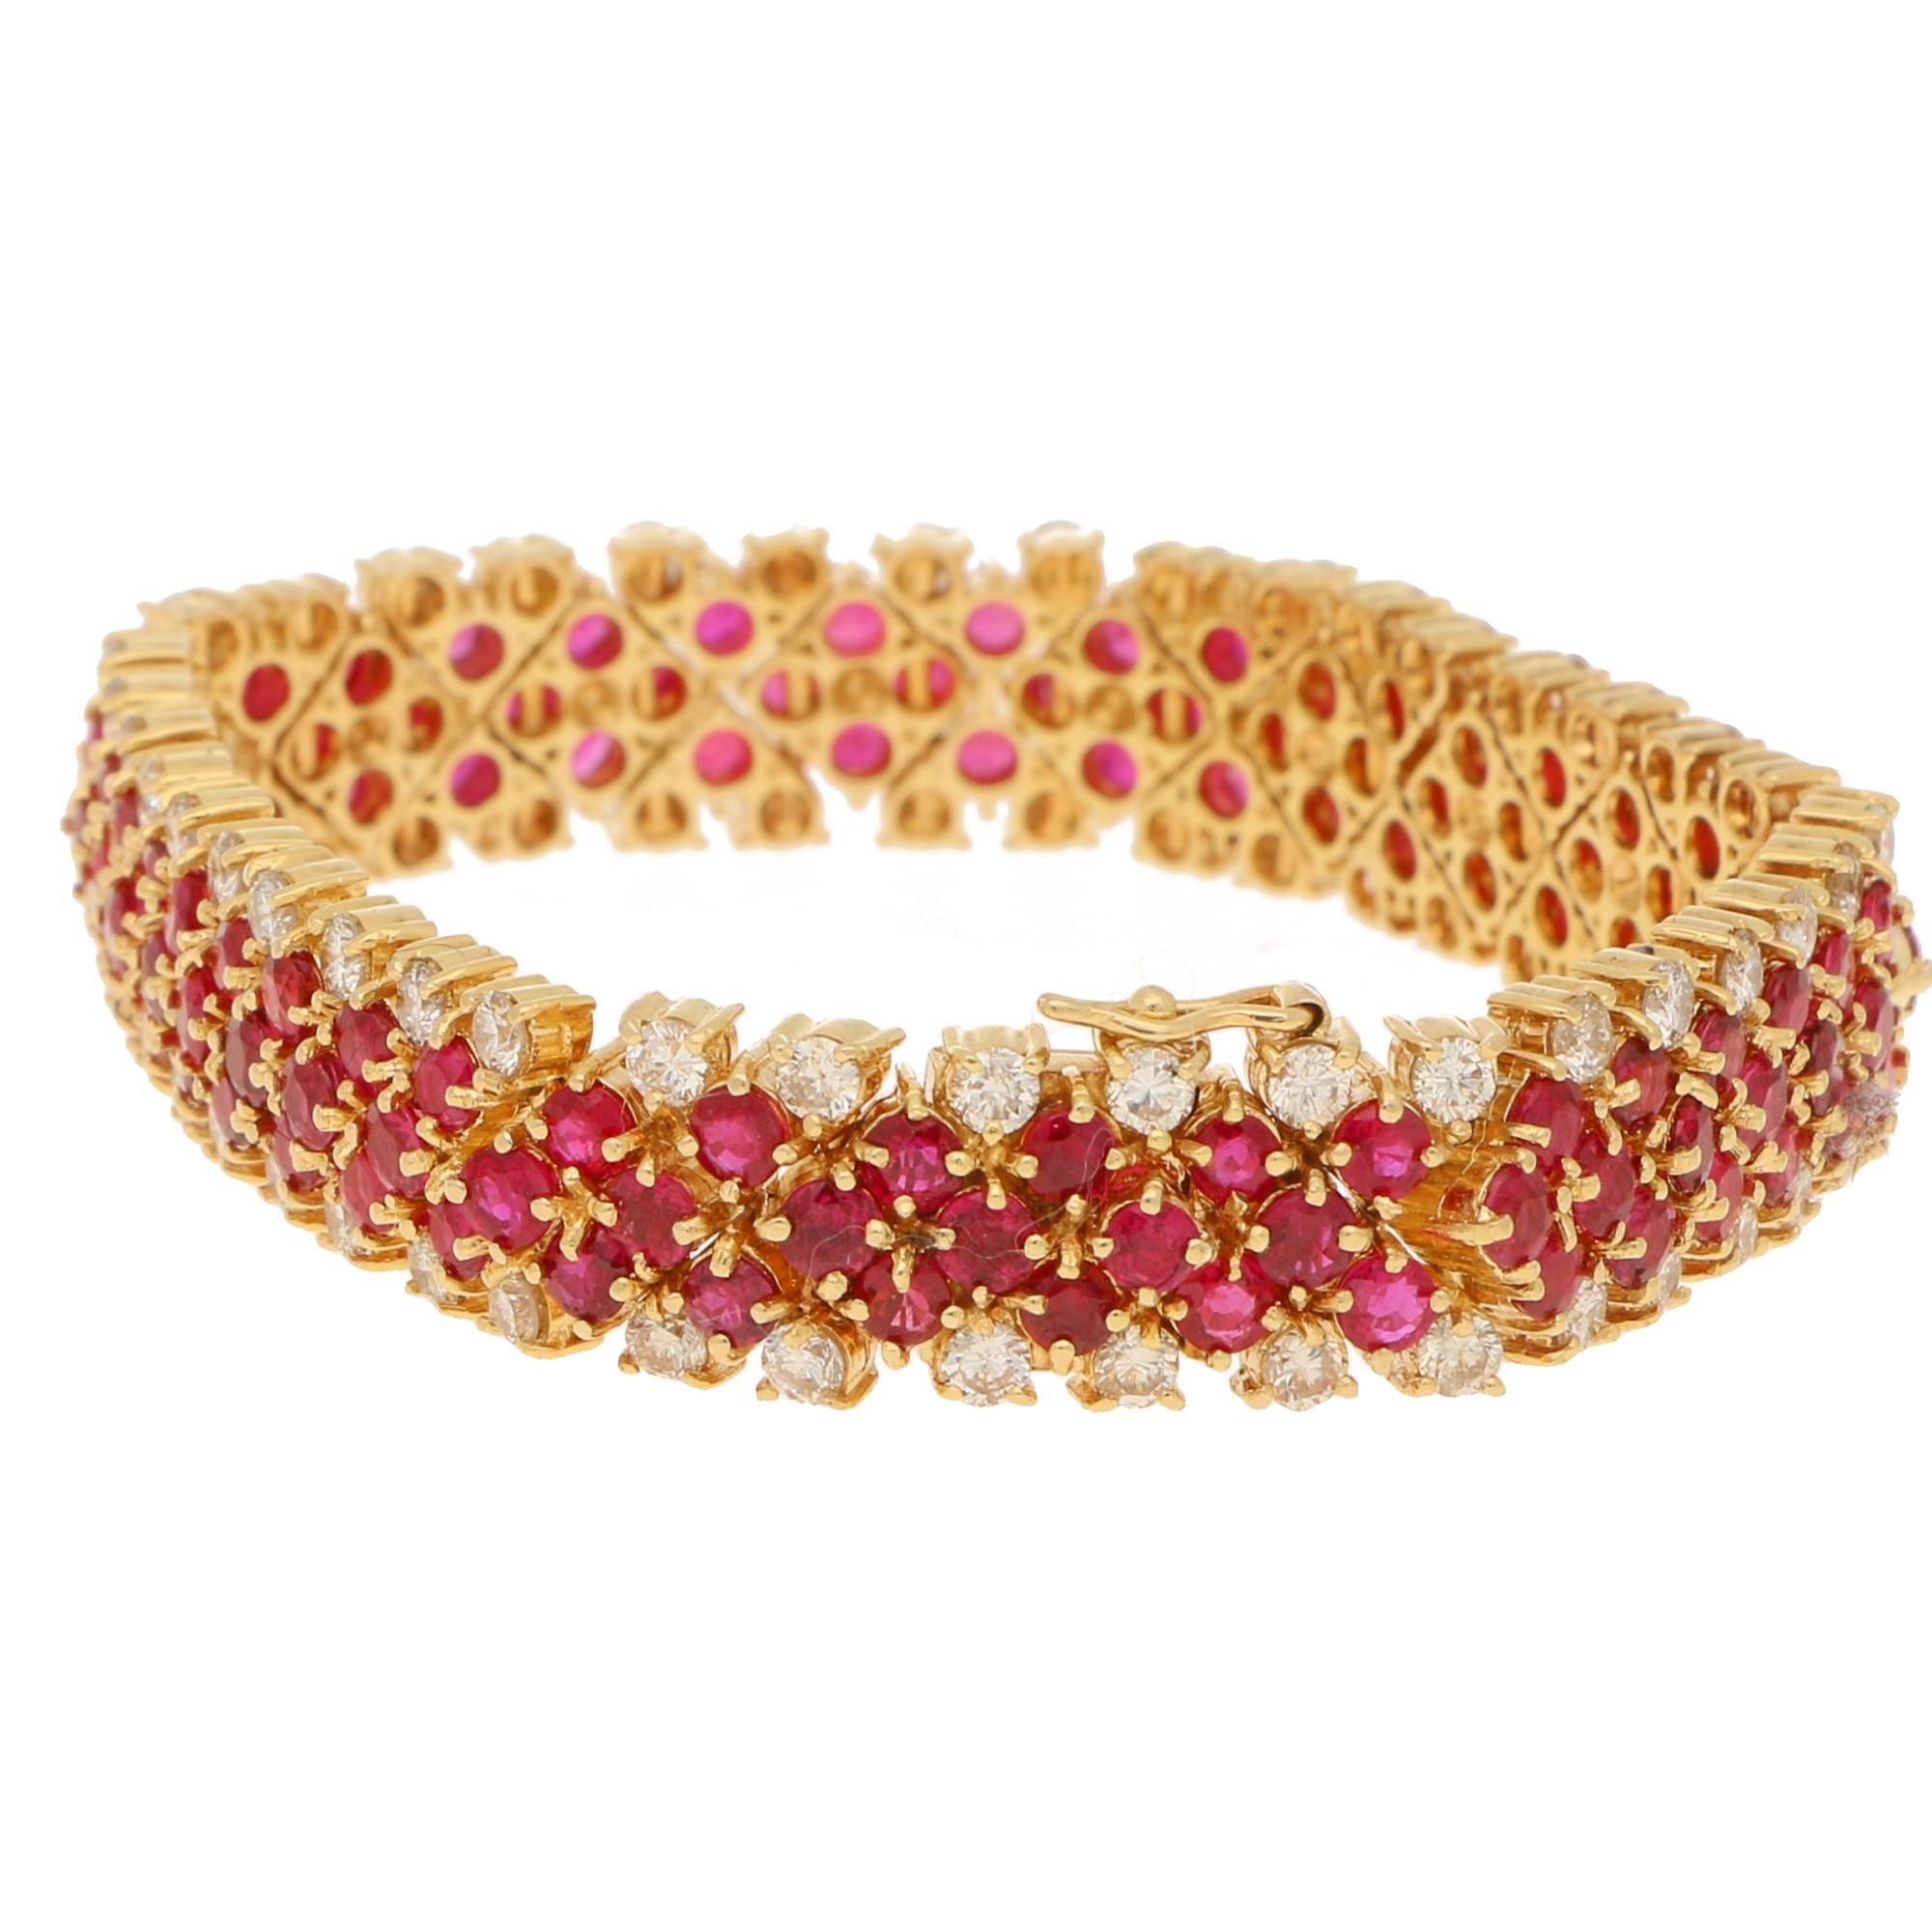 This truly stunning ruby and diamond bracelet features 114 single cut rubies totalling an estimated 7.98 carats and 76 single cut diamonds totalling an estimated 3.8 carats. This bracelet is set in 18 karat yellow gold with a beautifully crafted